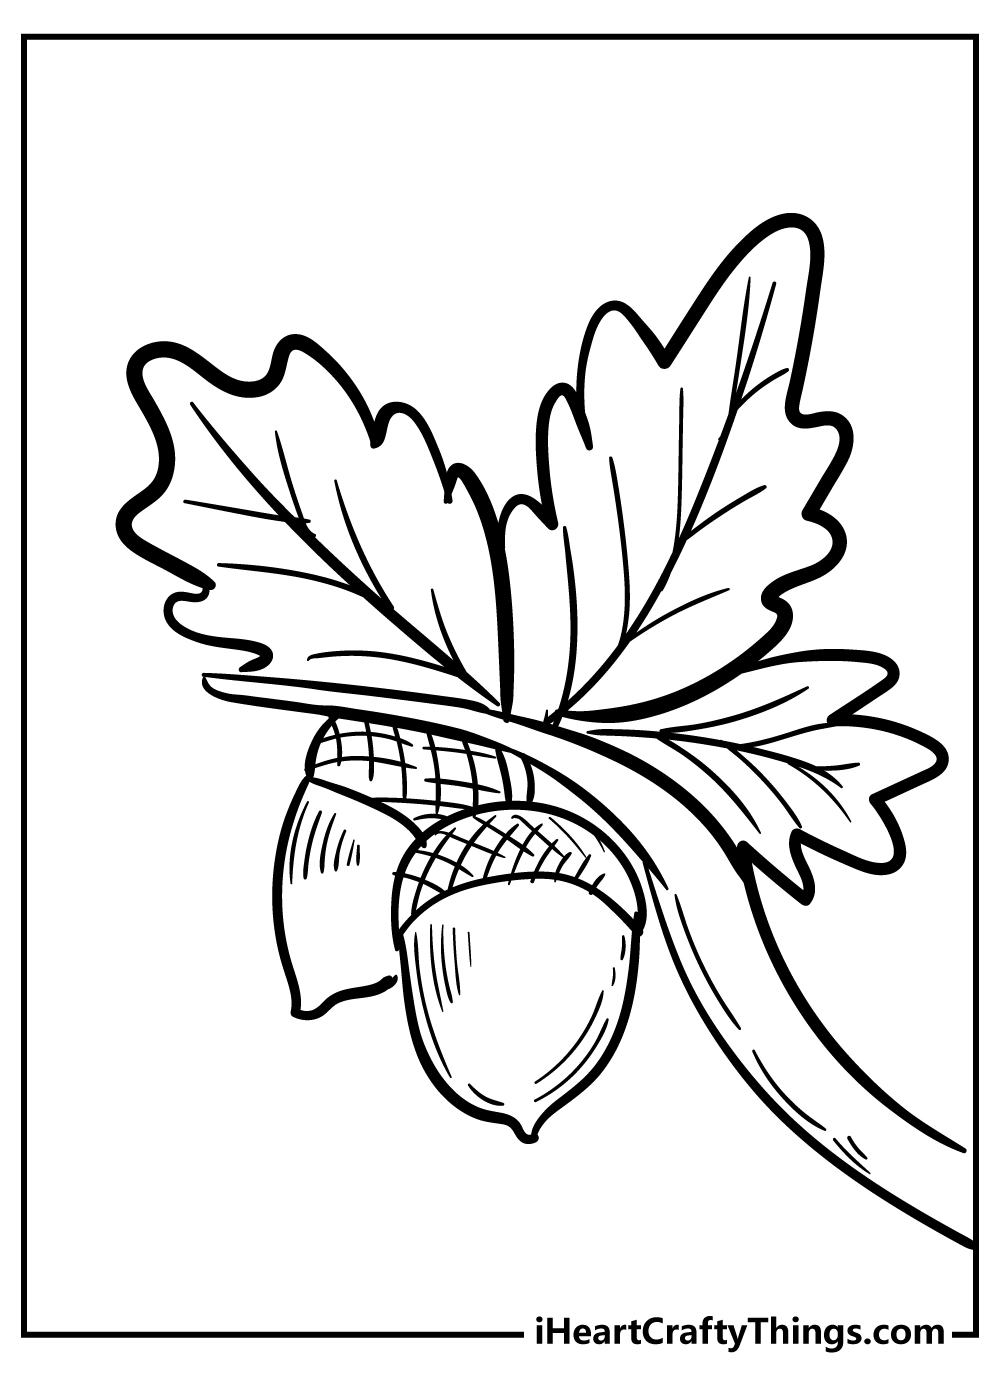 Printable Acorn Coloring Pages Updated 20